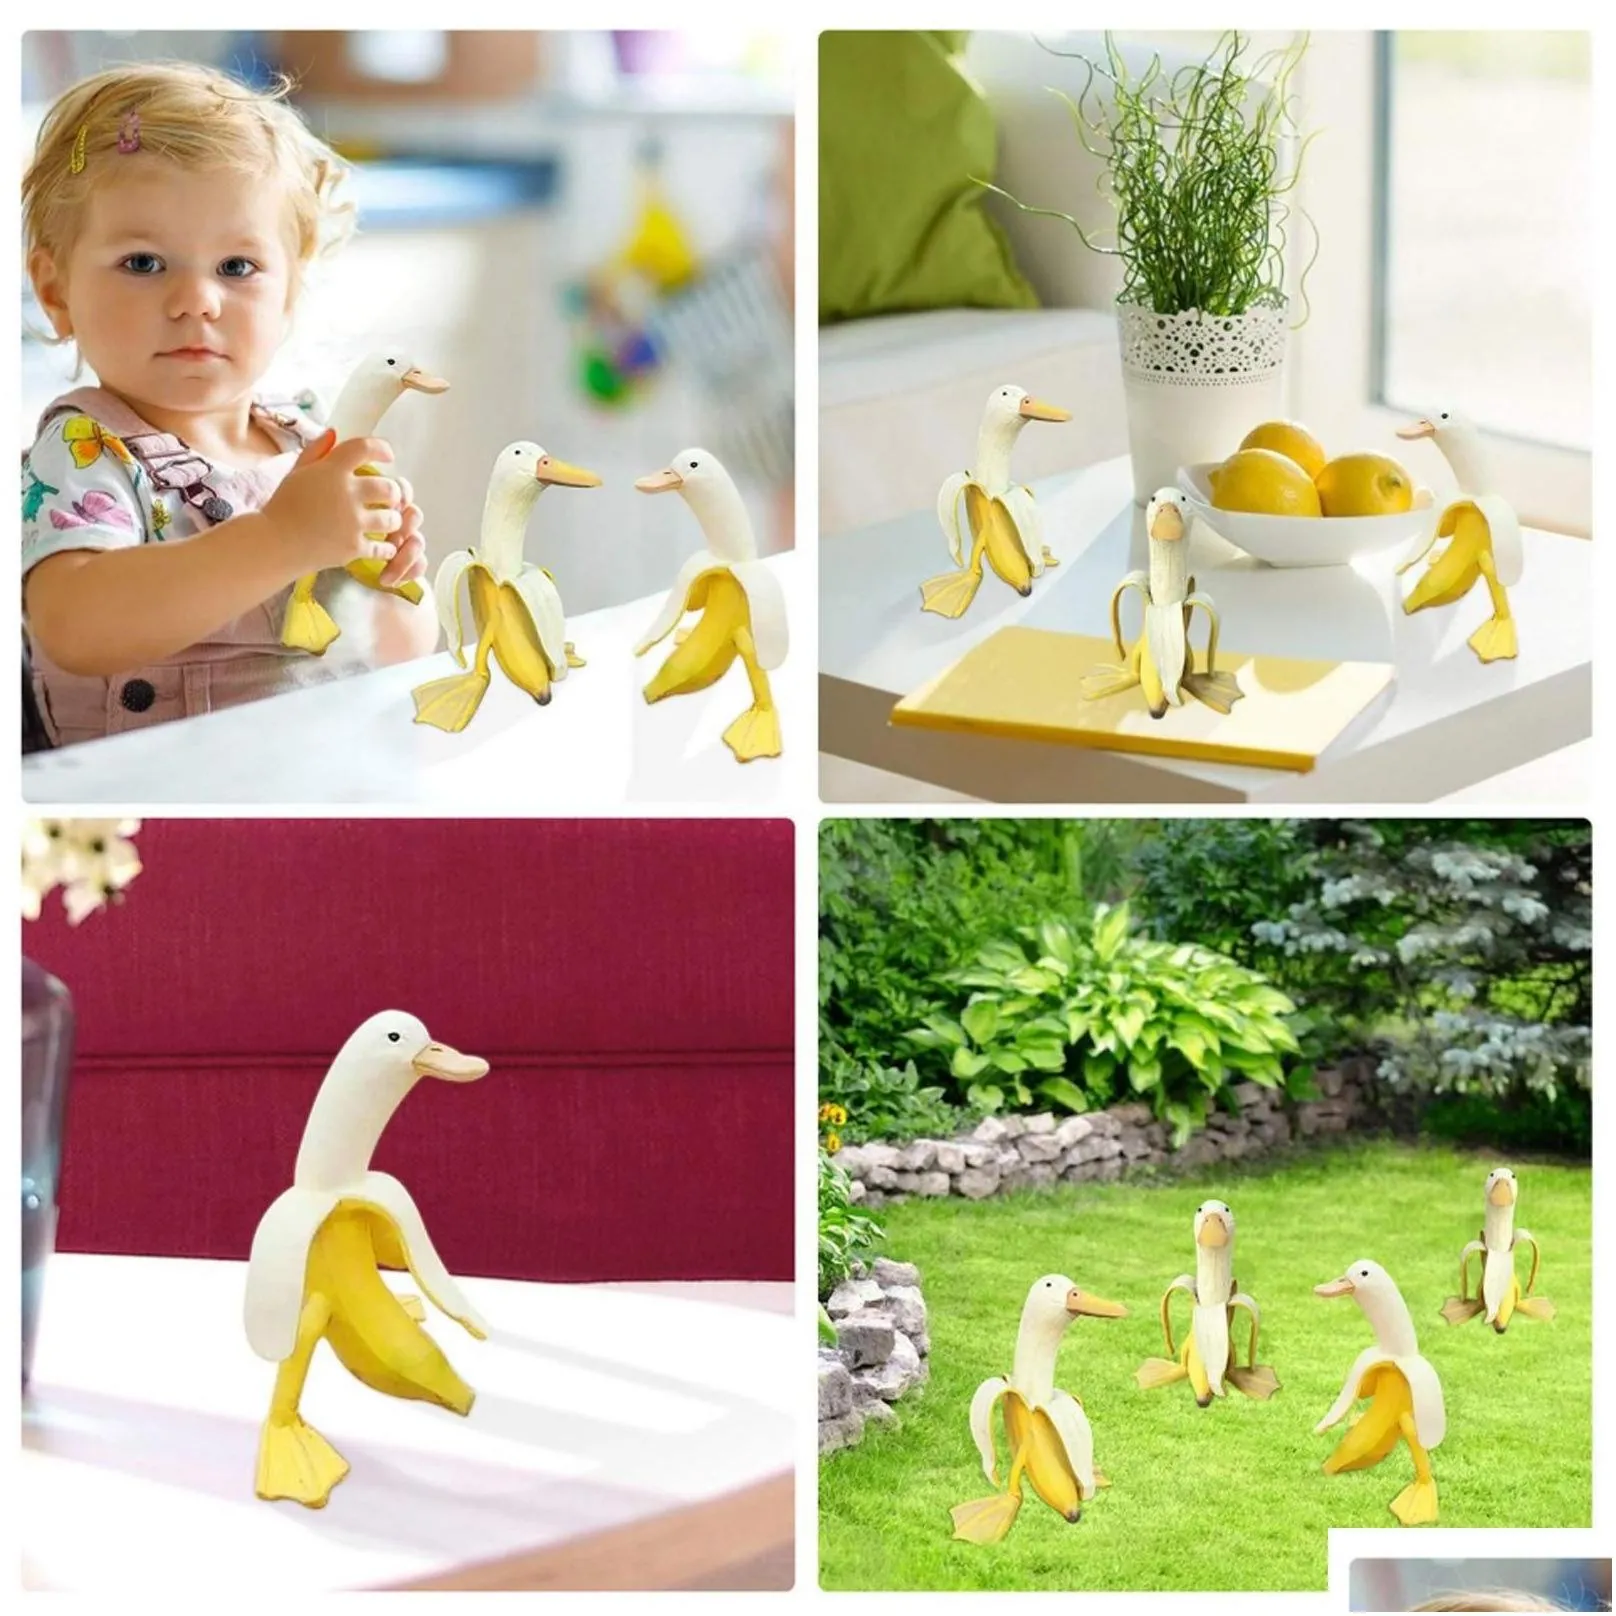 garden decorations banana duck creative decor scptures yard vintage gardening art whimsical peeled home statues crafts drop delivery